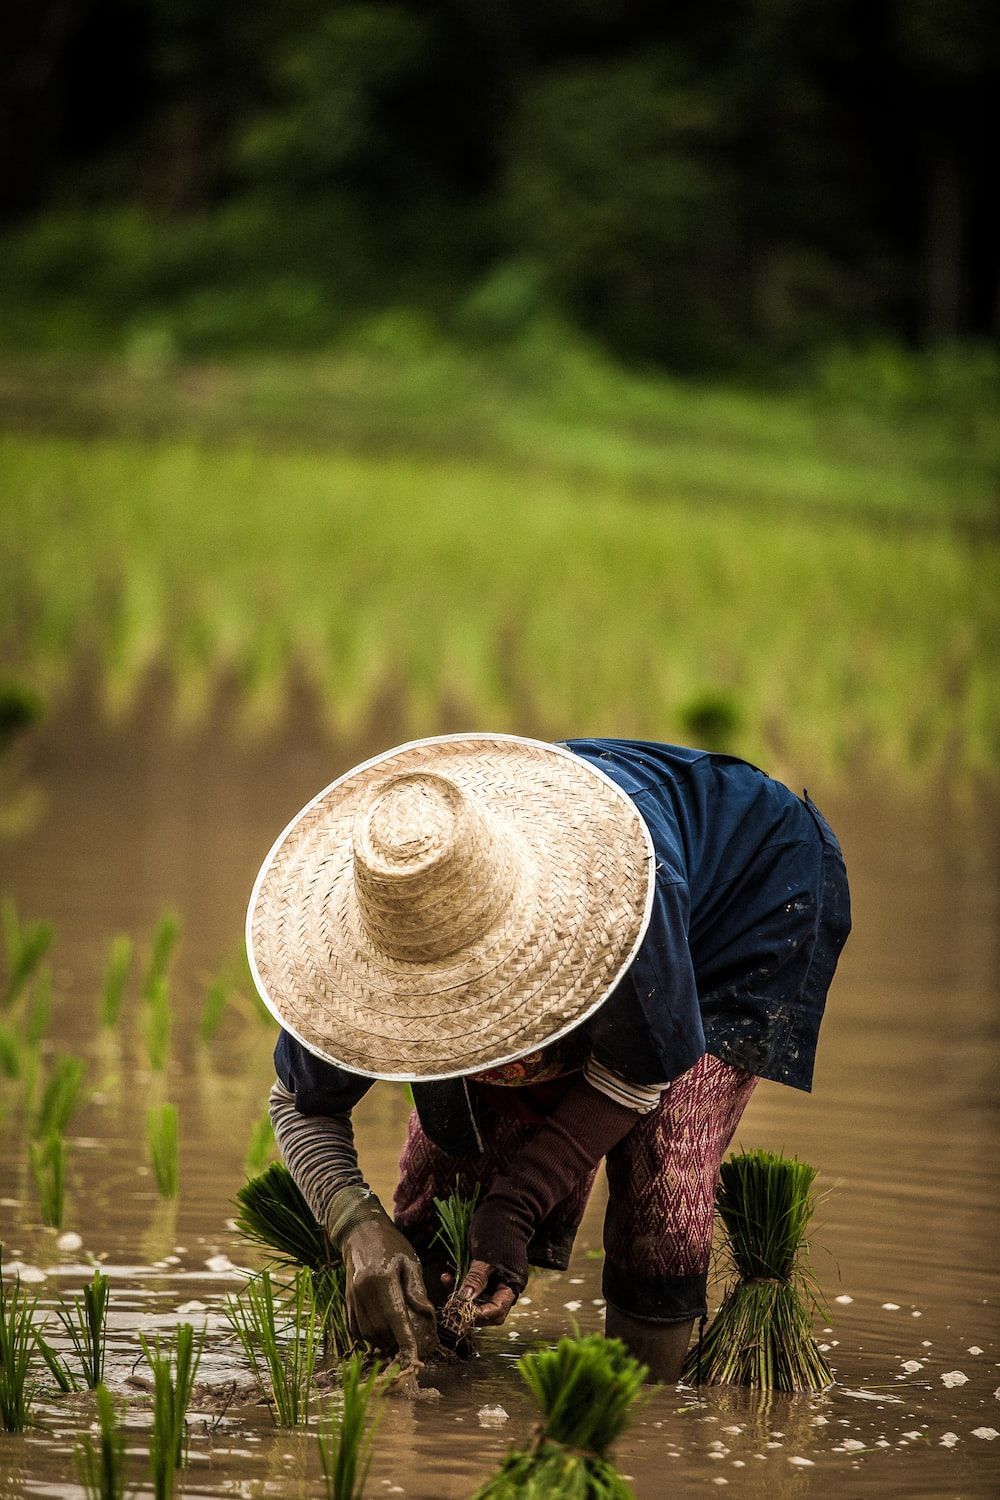 A person wearing a straw hat plants rice in a muddy field - Farm